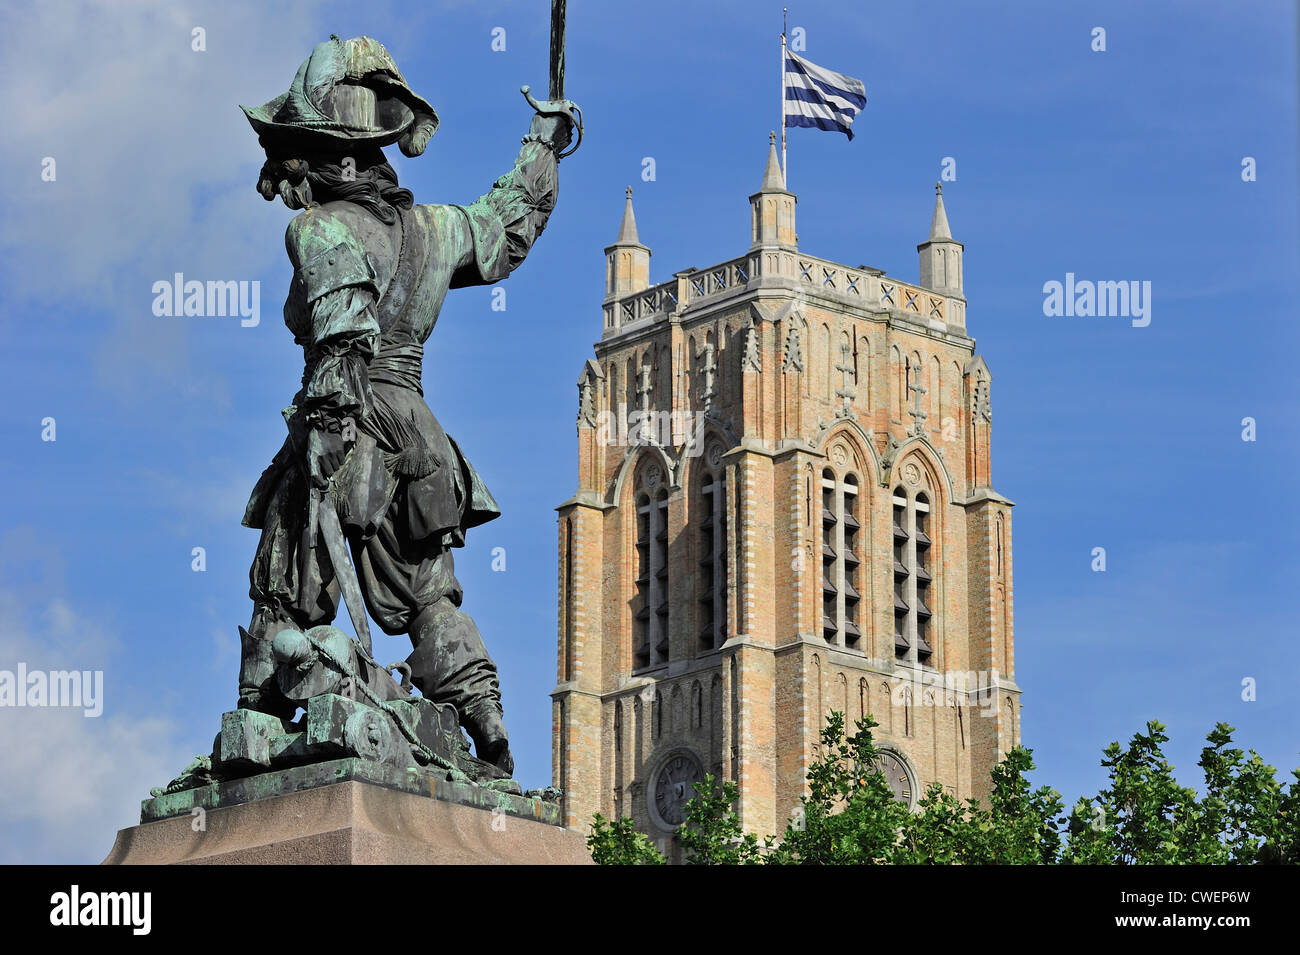 Statue of Jean Bart, naval commander and privateer and the belfry at Dunkirk / Dunkerque, Nord-Pas-de-Calais, France Stock Photo